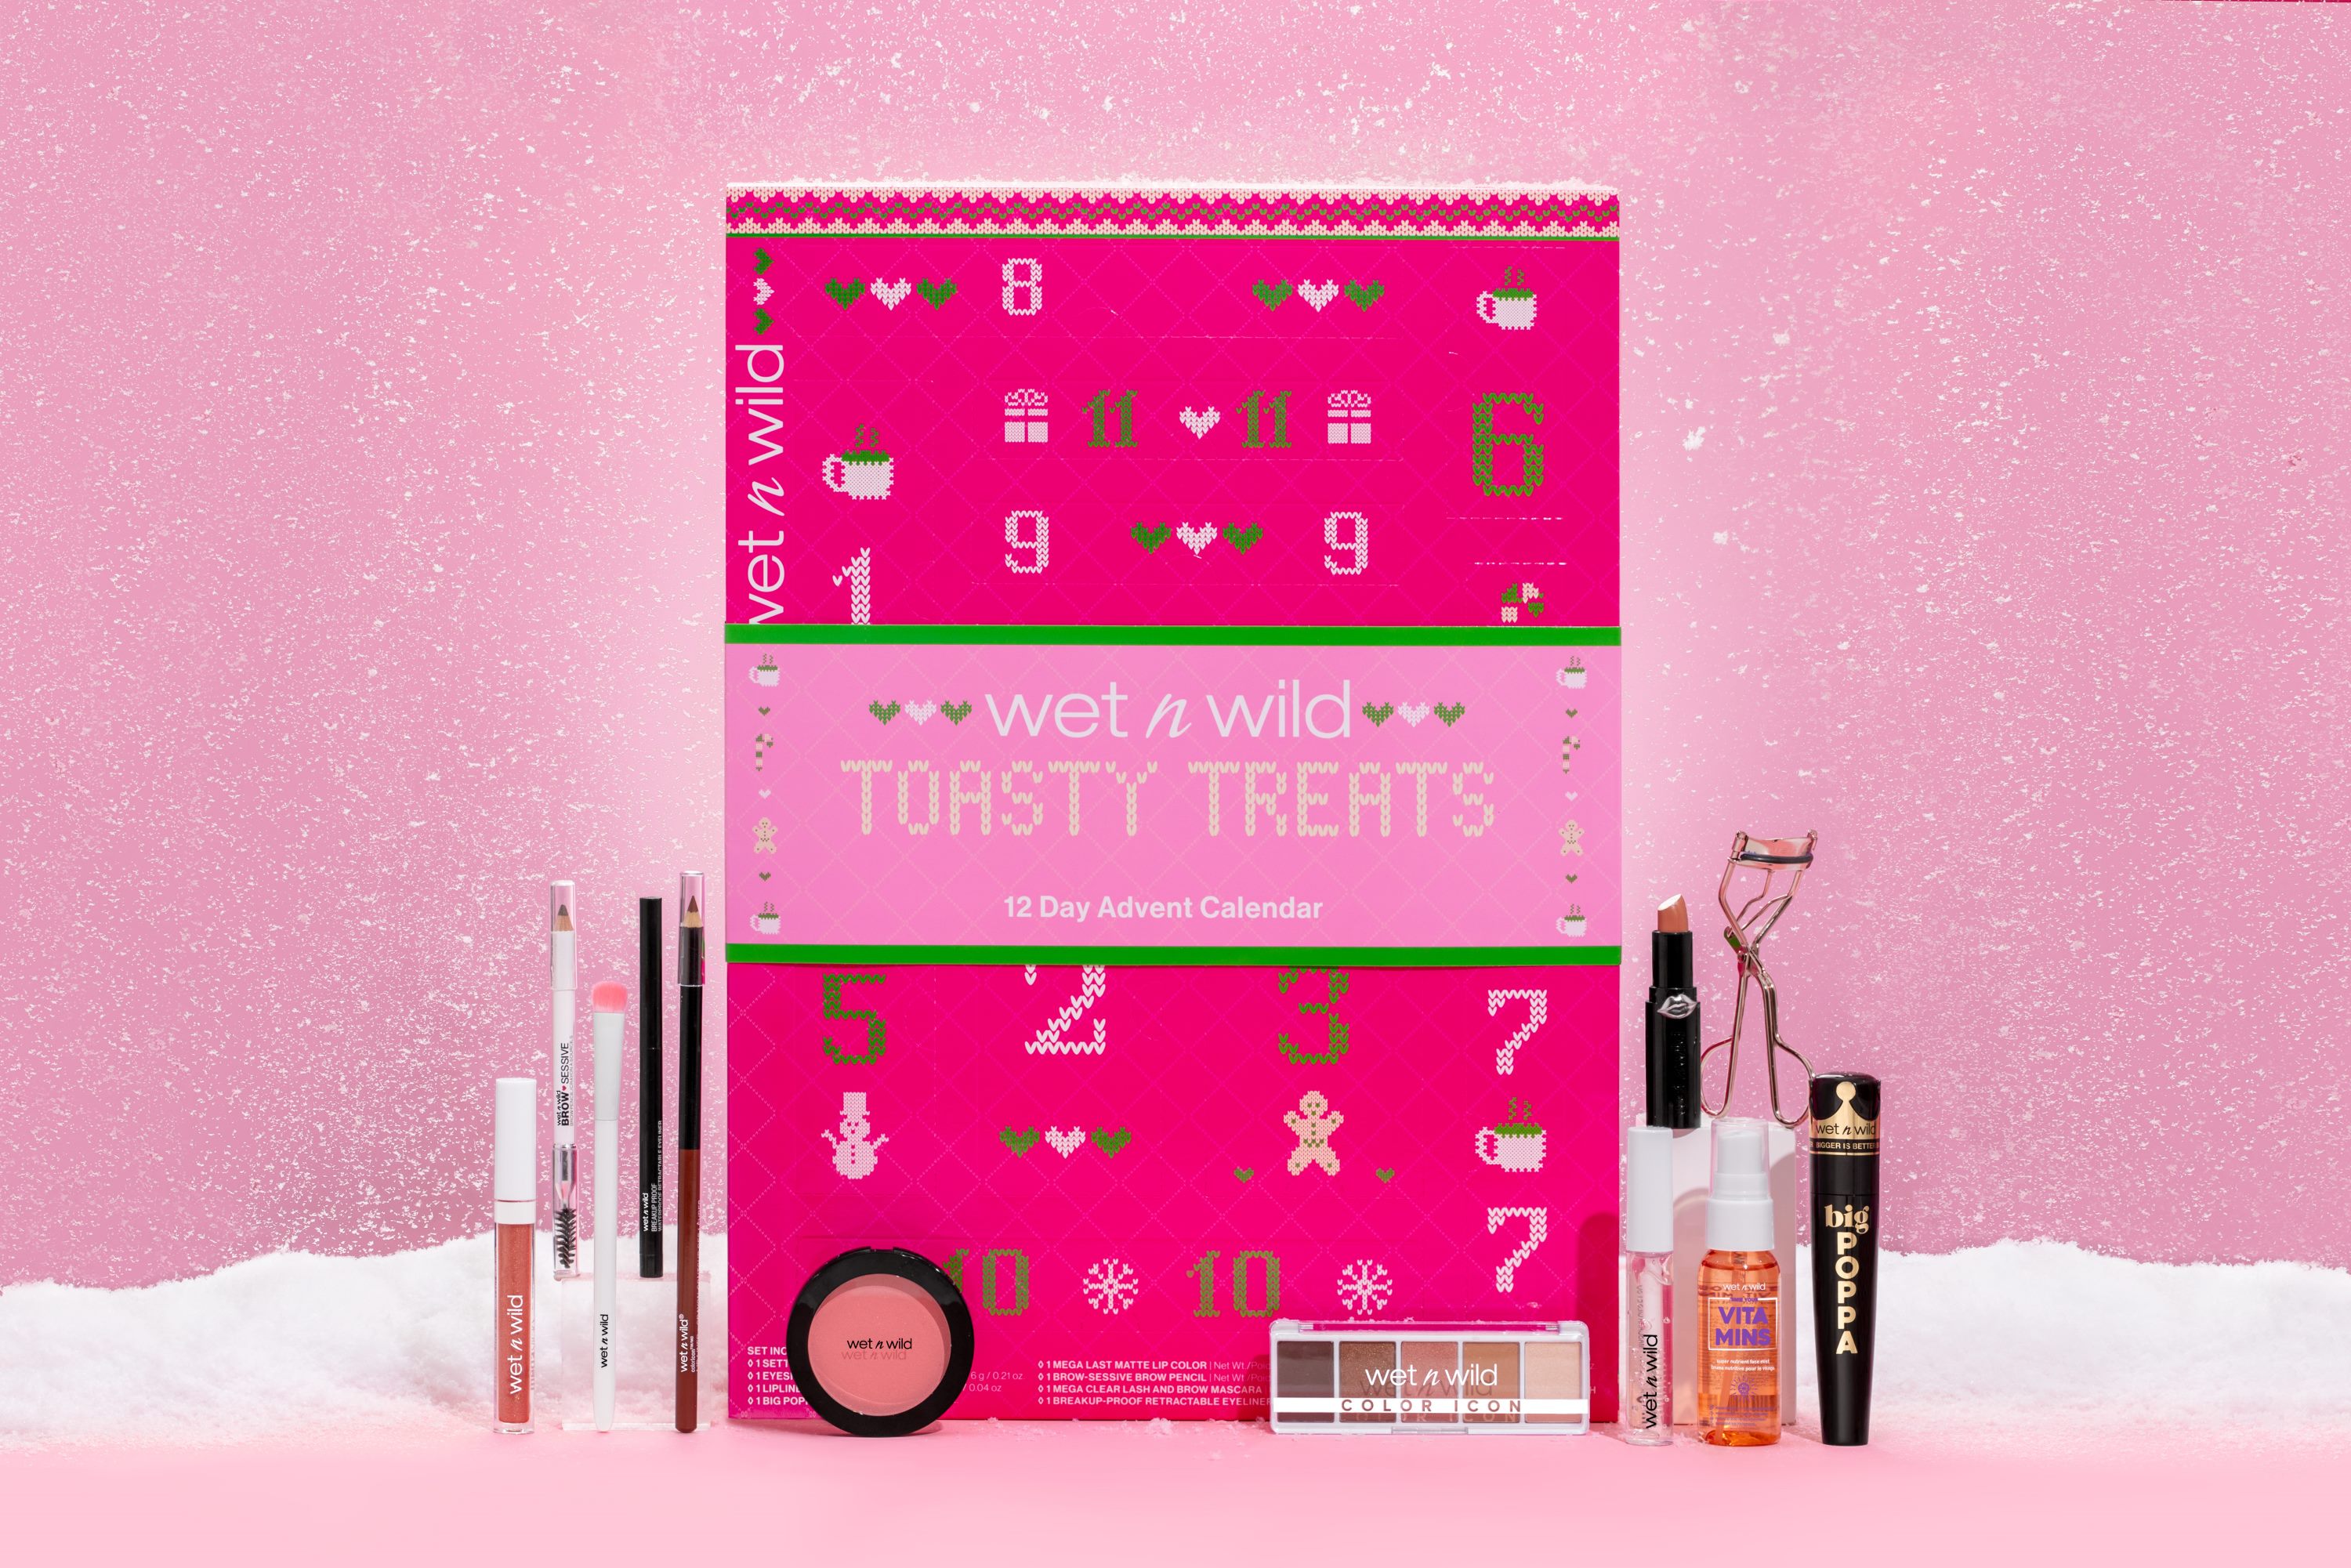 ($33 Value) 2022 Wet N Wild 12 day Advent Calendar - Exclusively at Walmart! - image 1 of 7